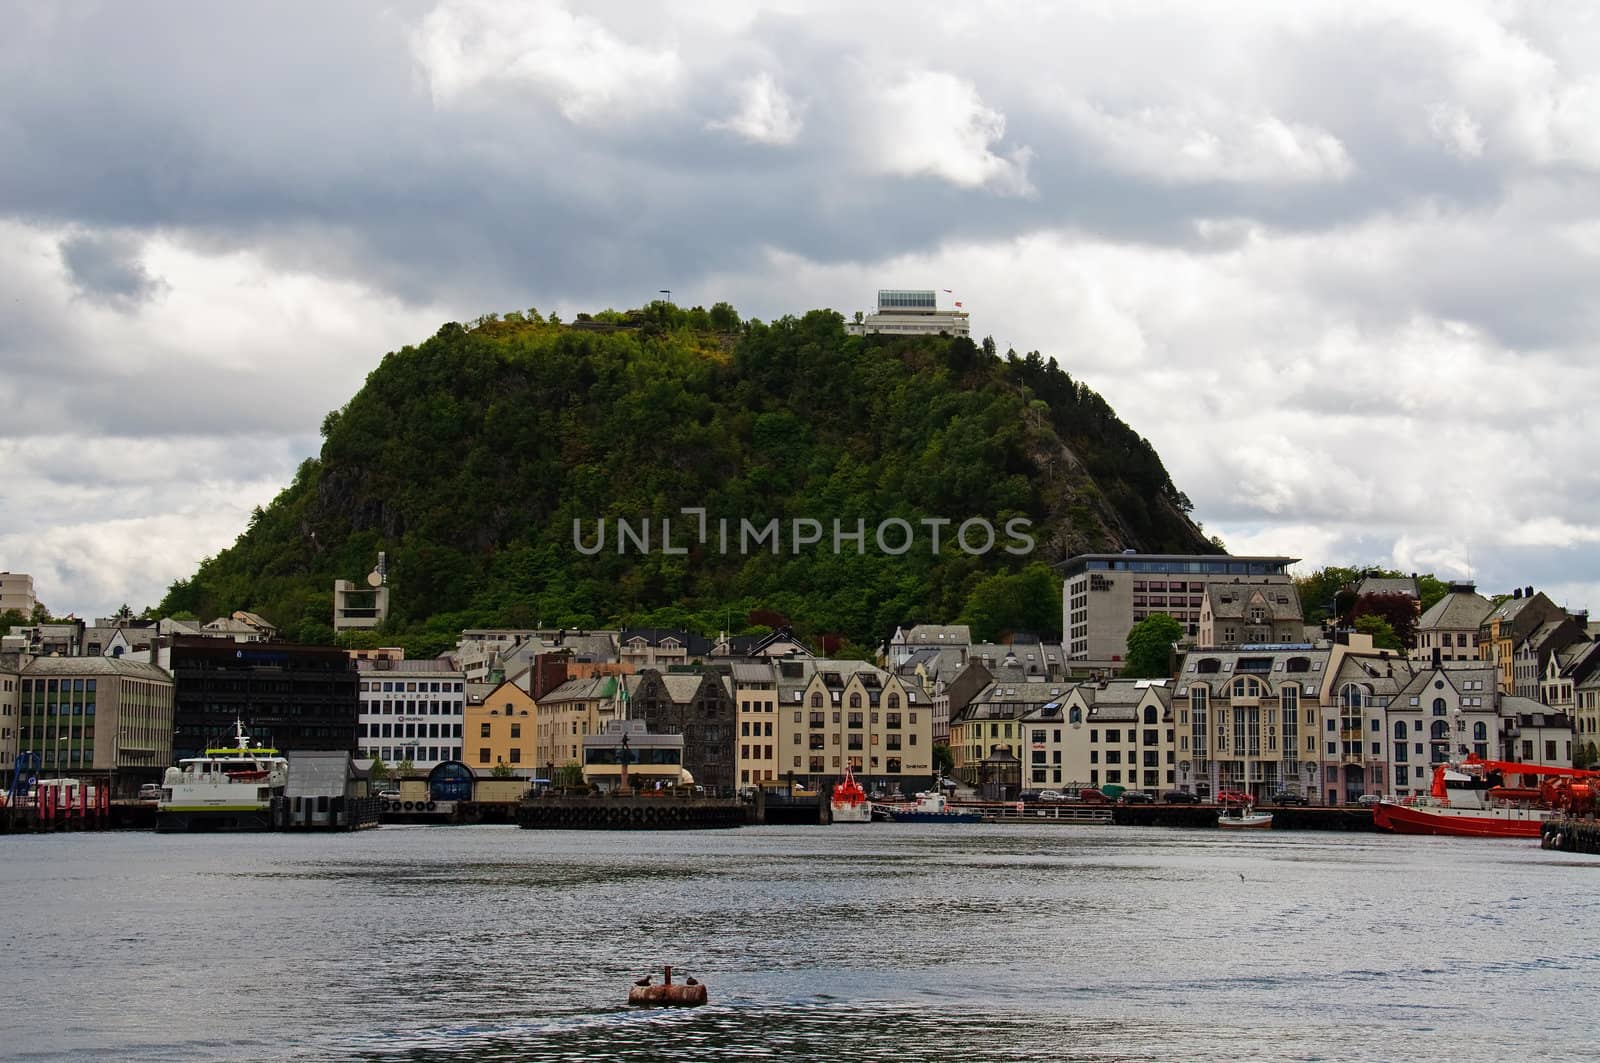 City of Aalesund, Norway with the harbour and the mountain called Aksla